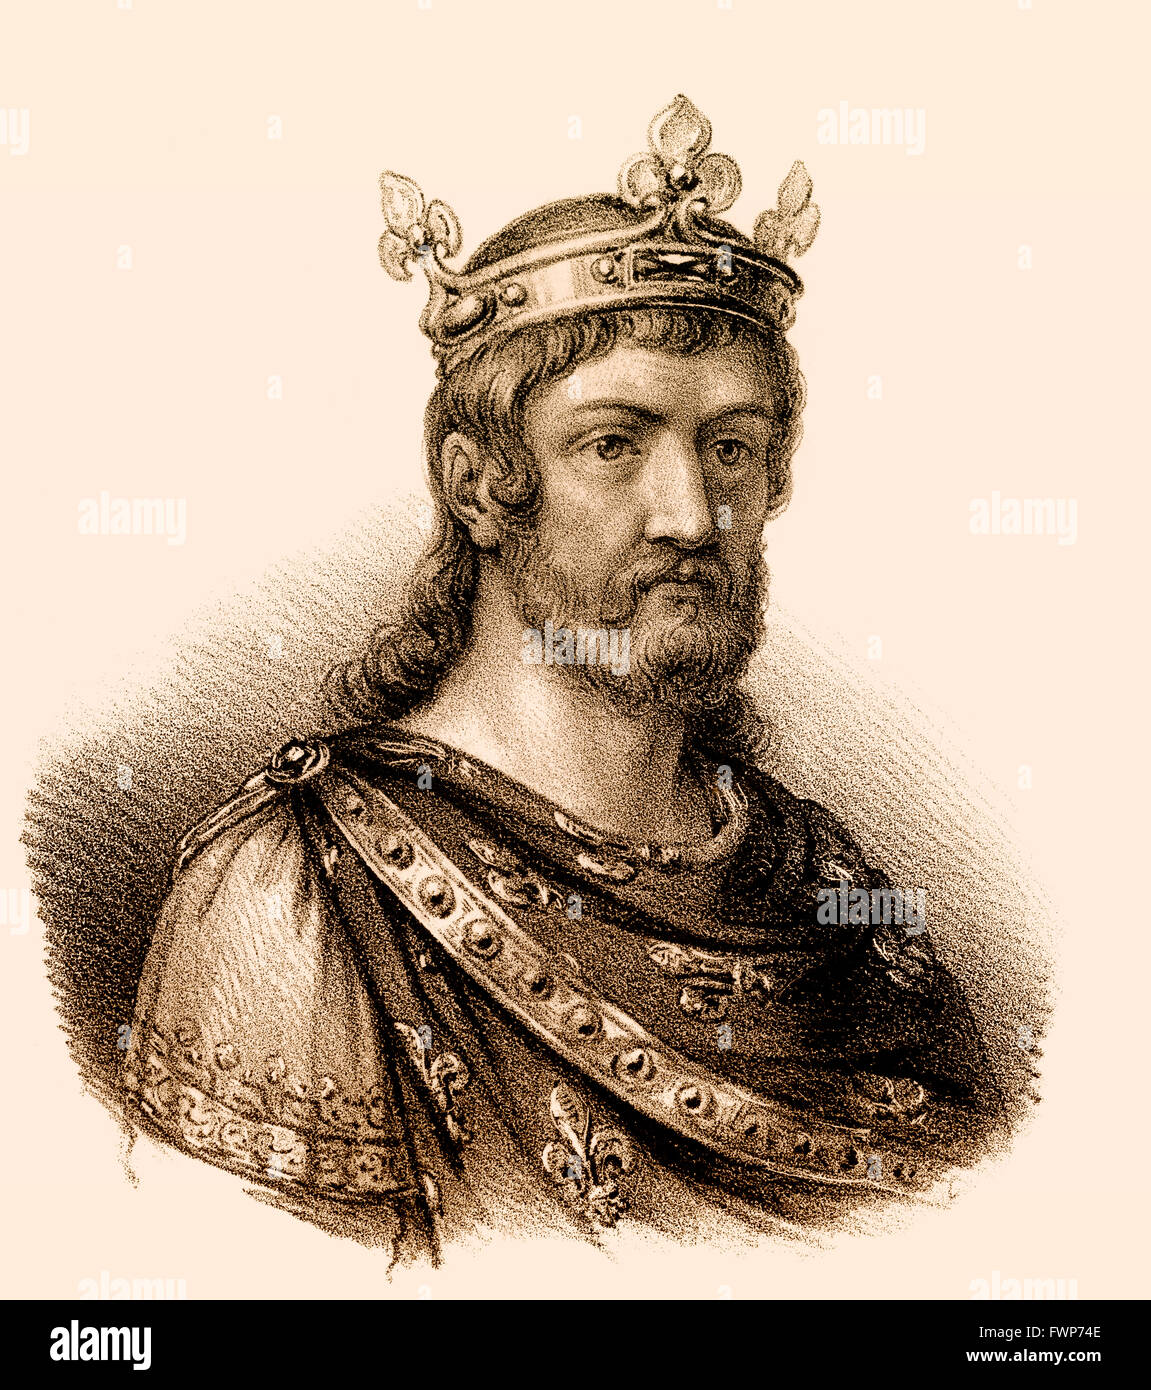 Theuderic IV, Thierry IV. c. 712-737, or Theuderich, Theoderic, Theodoric; Merovingian King of the Franks Stock Photo